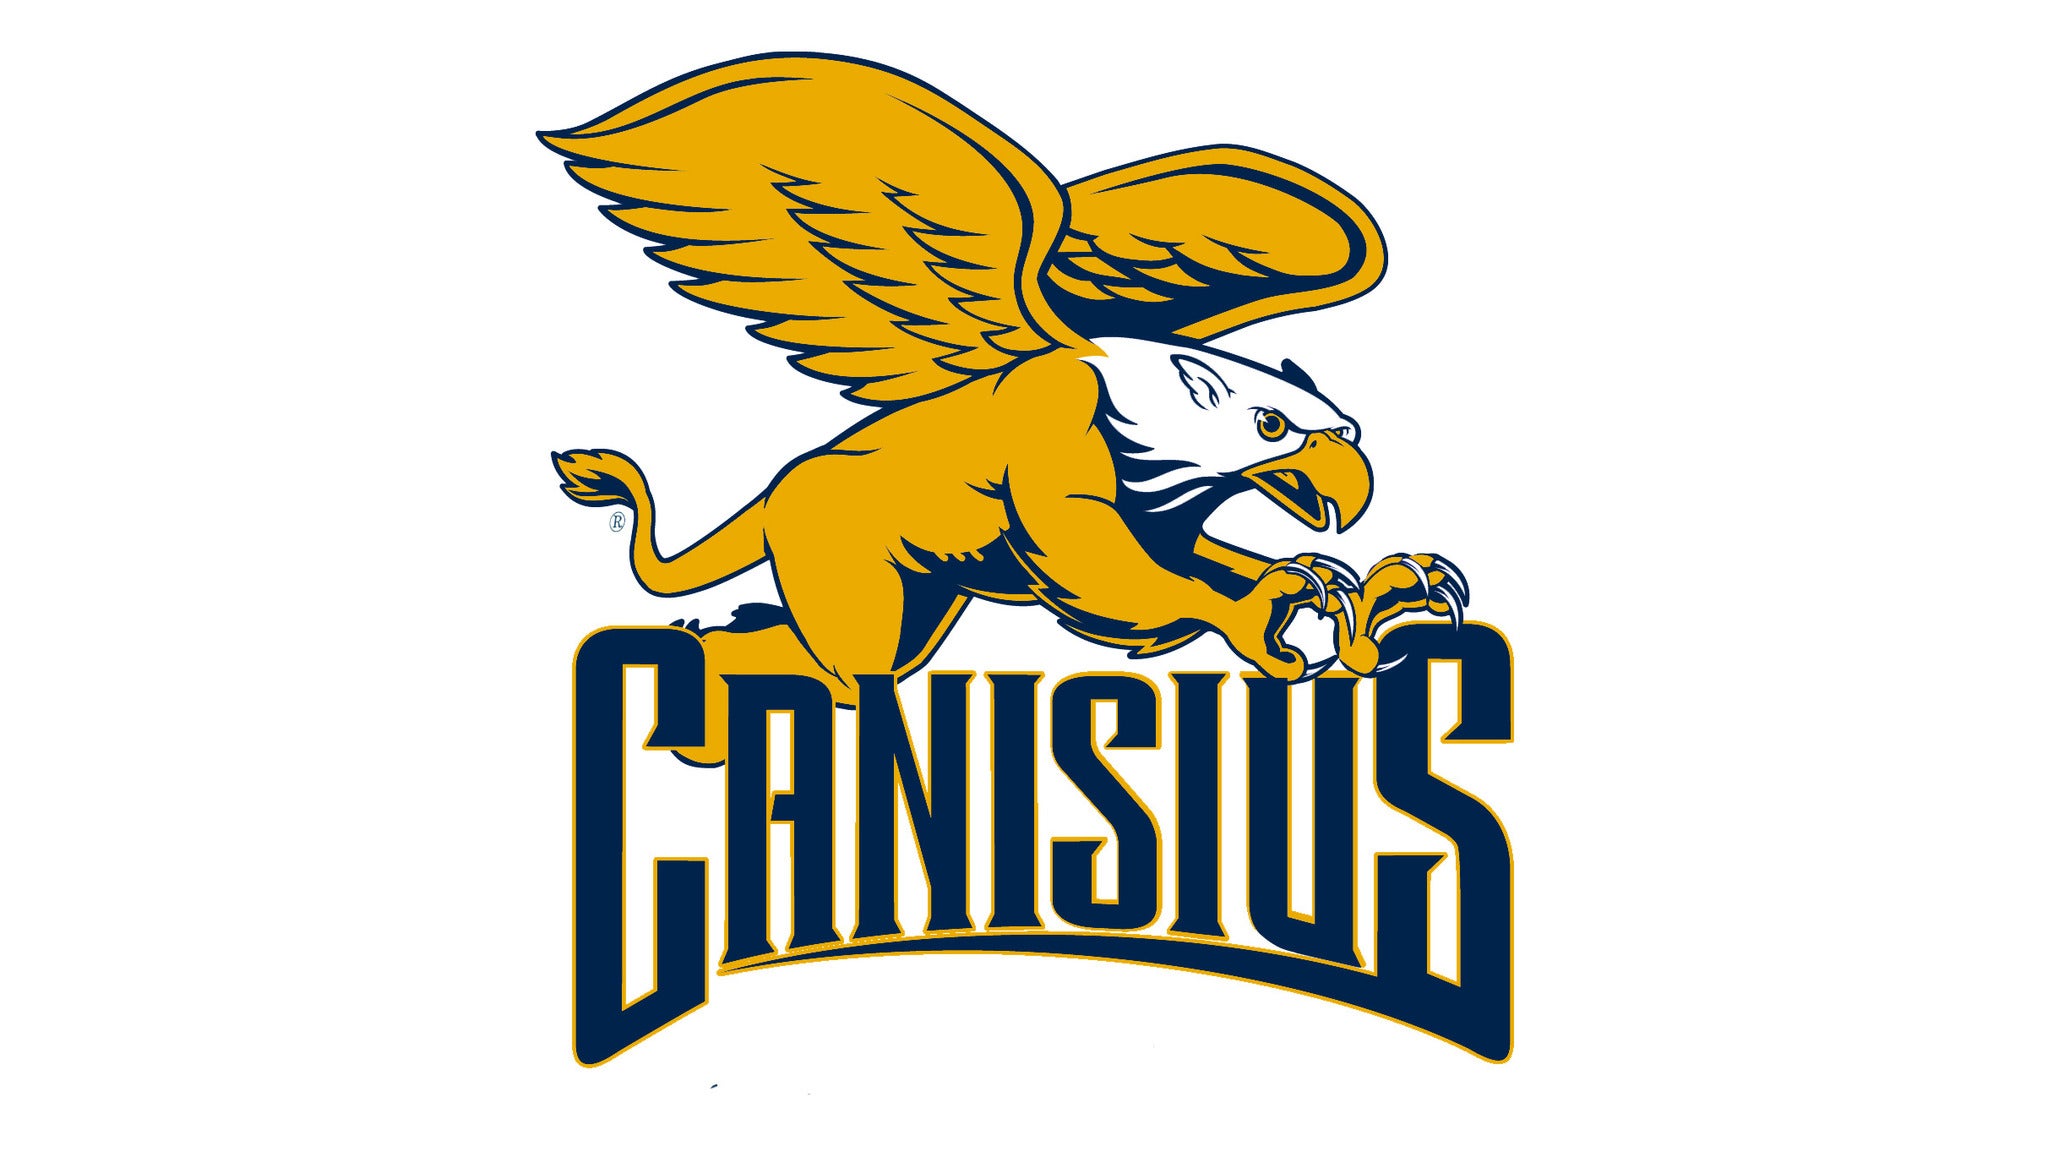 Canisius Womens's Basketball vs. Manhattan in Buffalo promo photo for Canisius Fan presale offer code